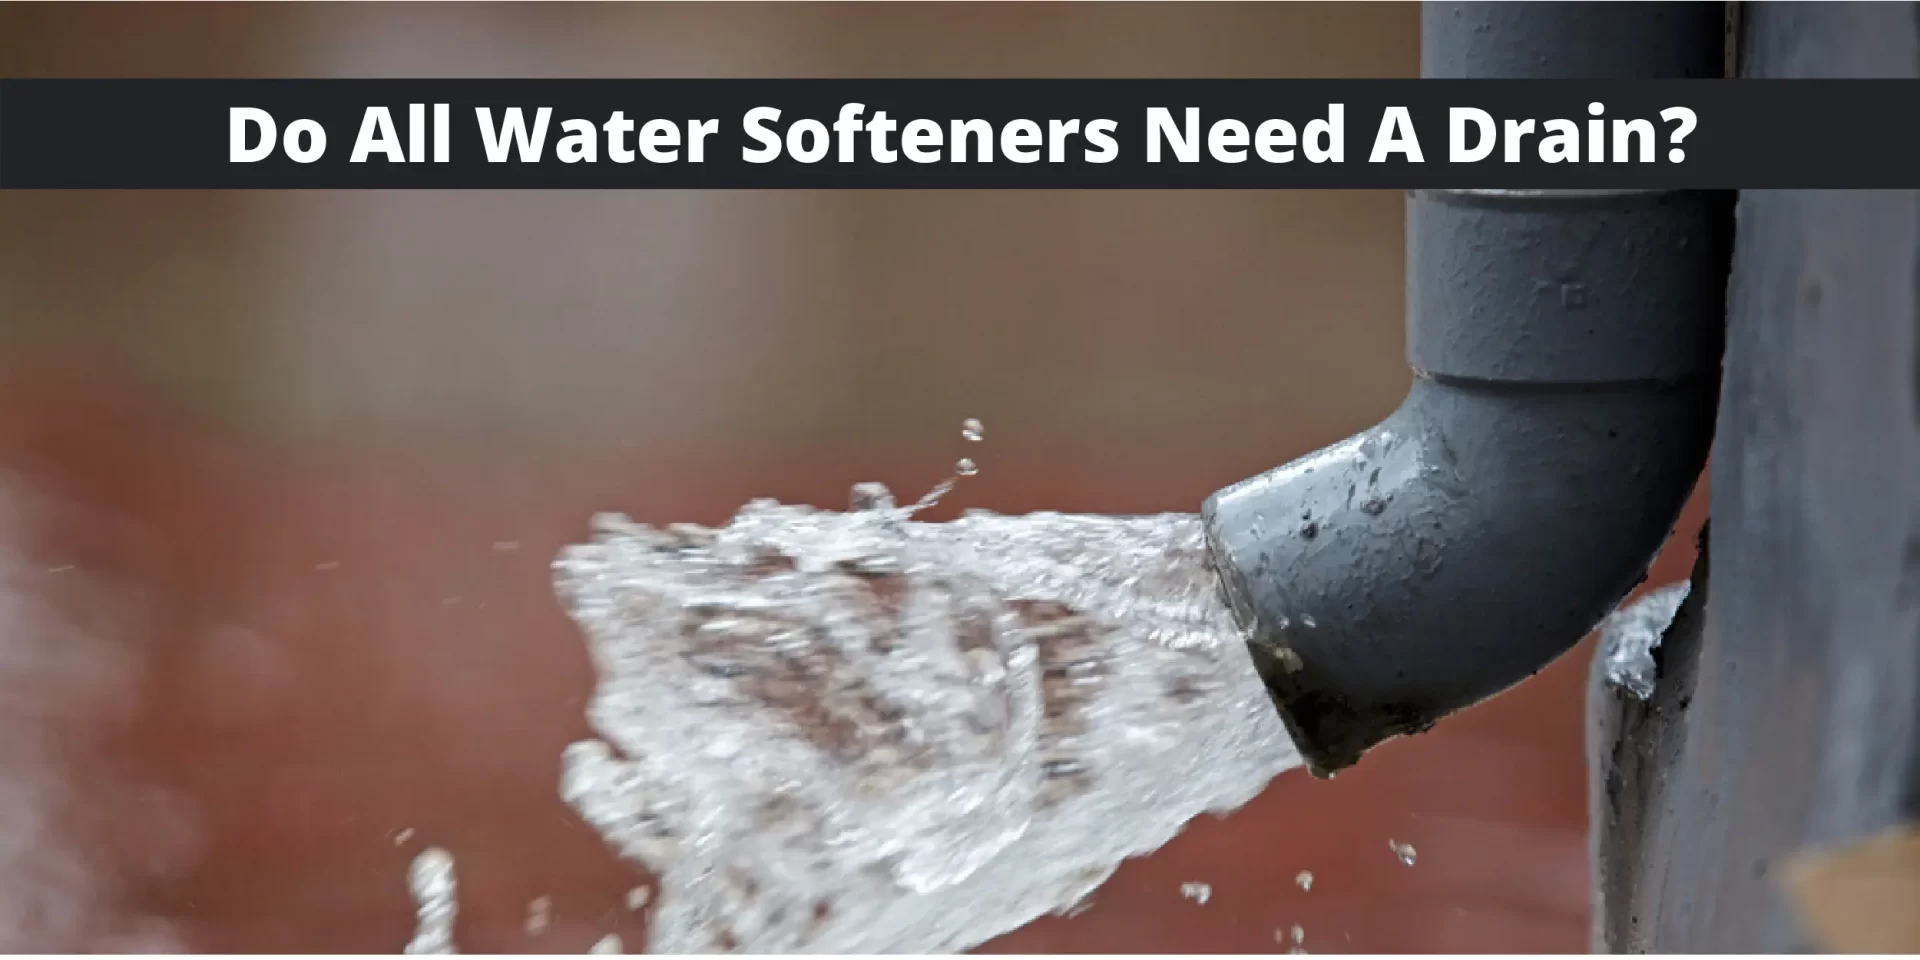 Do All Water Softeners Need a Drain?